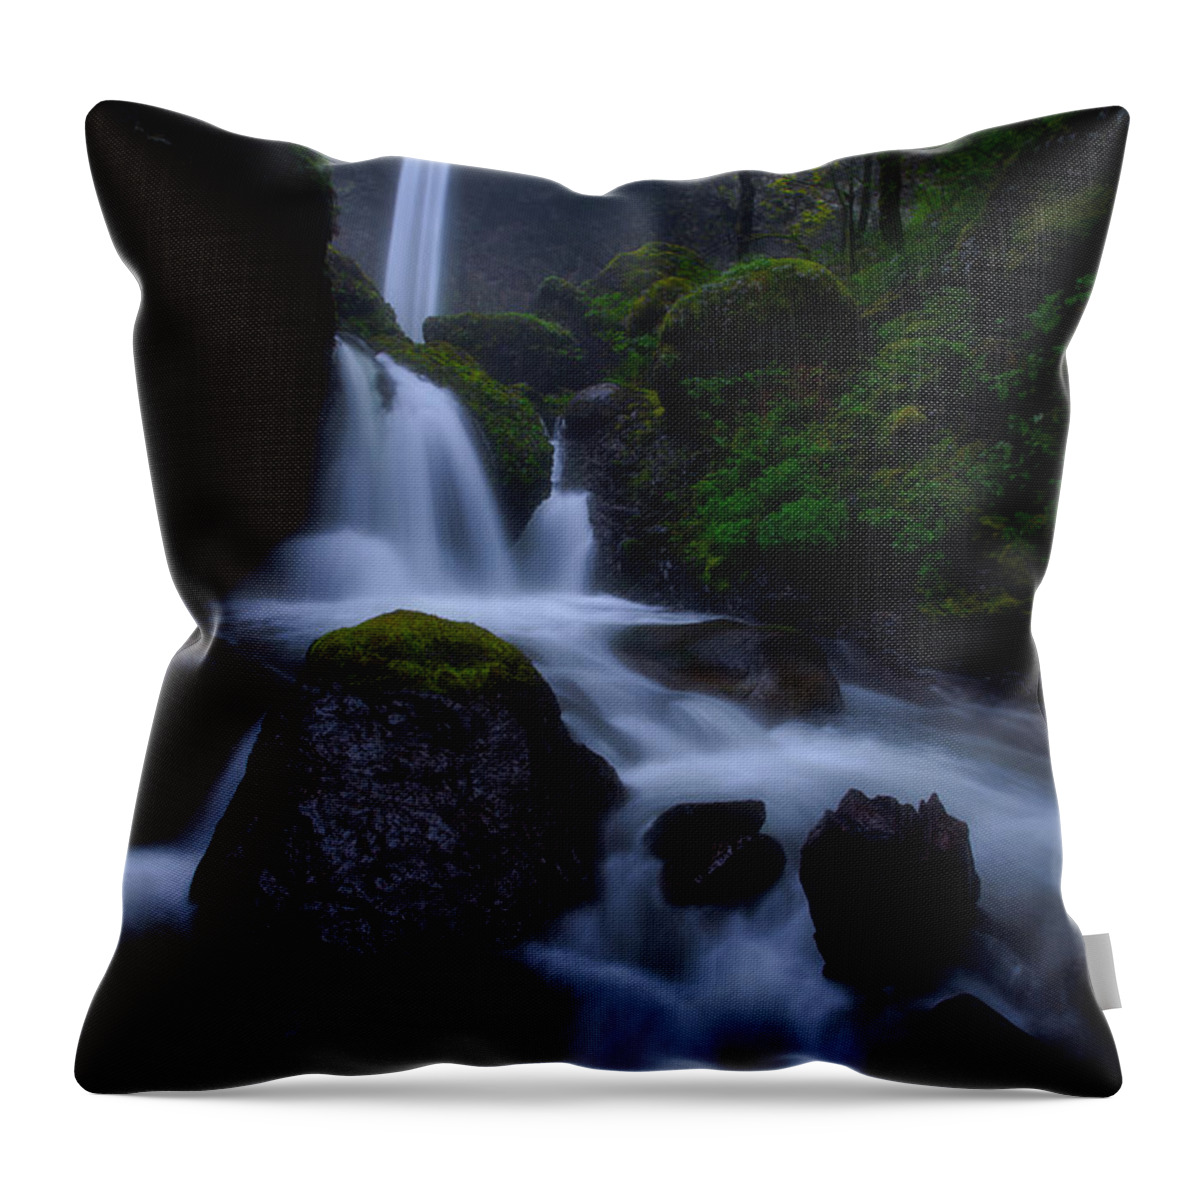 Fall Throw Pillow featuring the photograph Elowah's Mist by Darren White